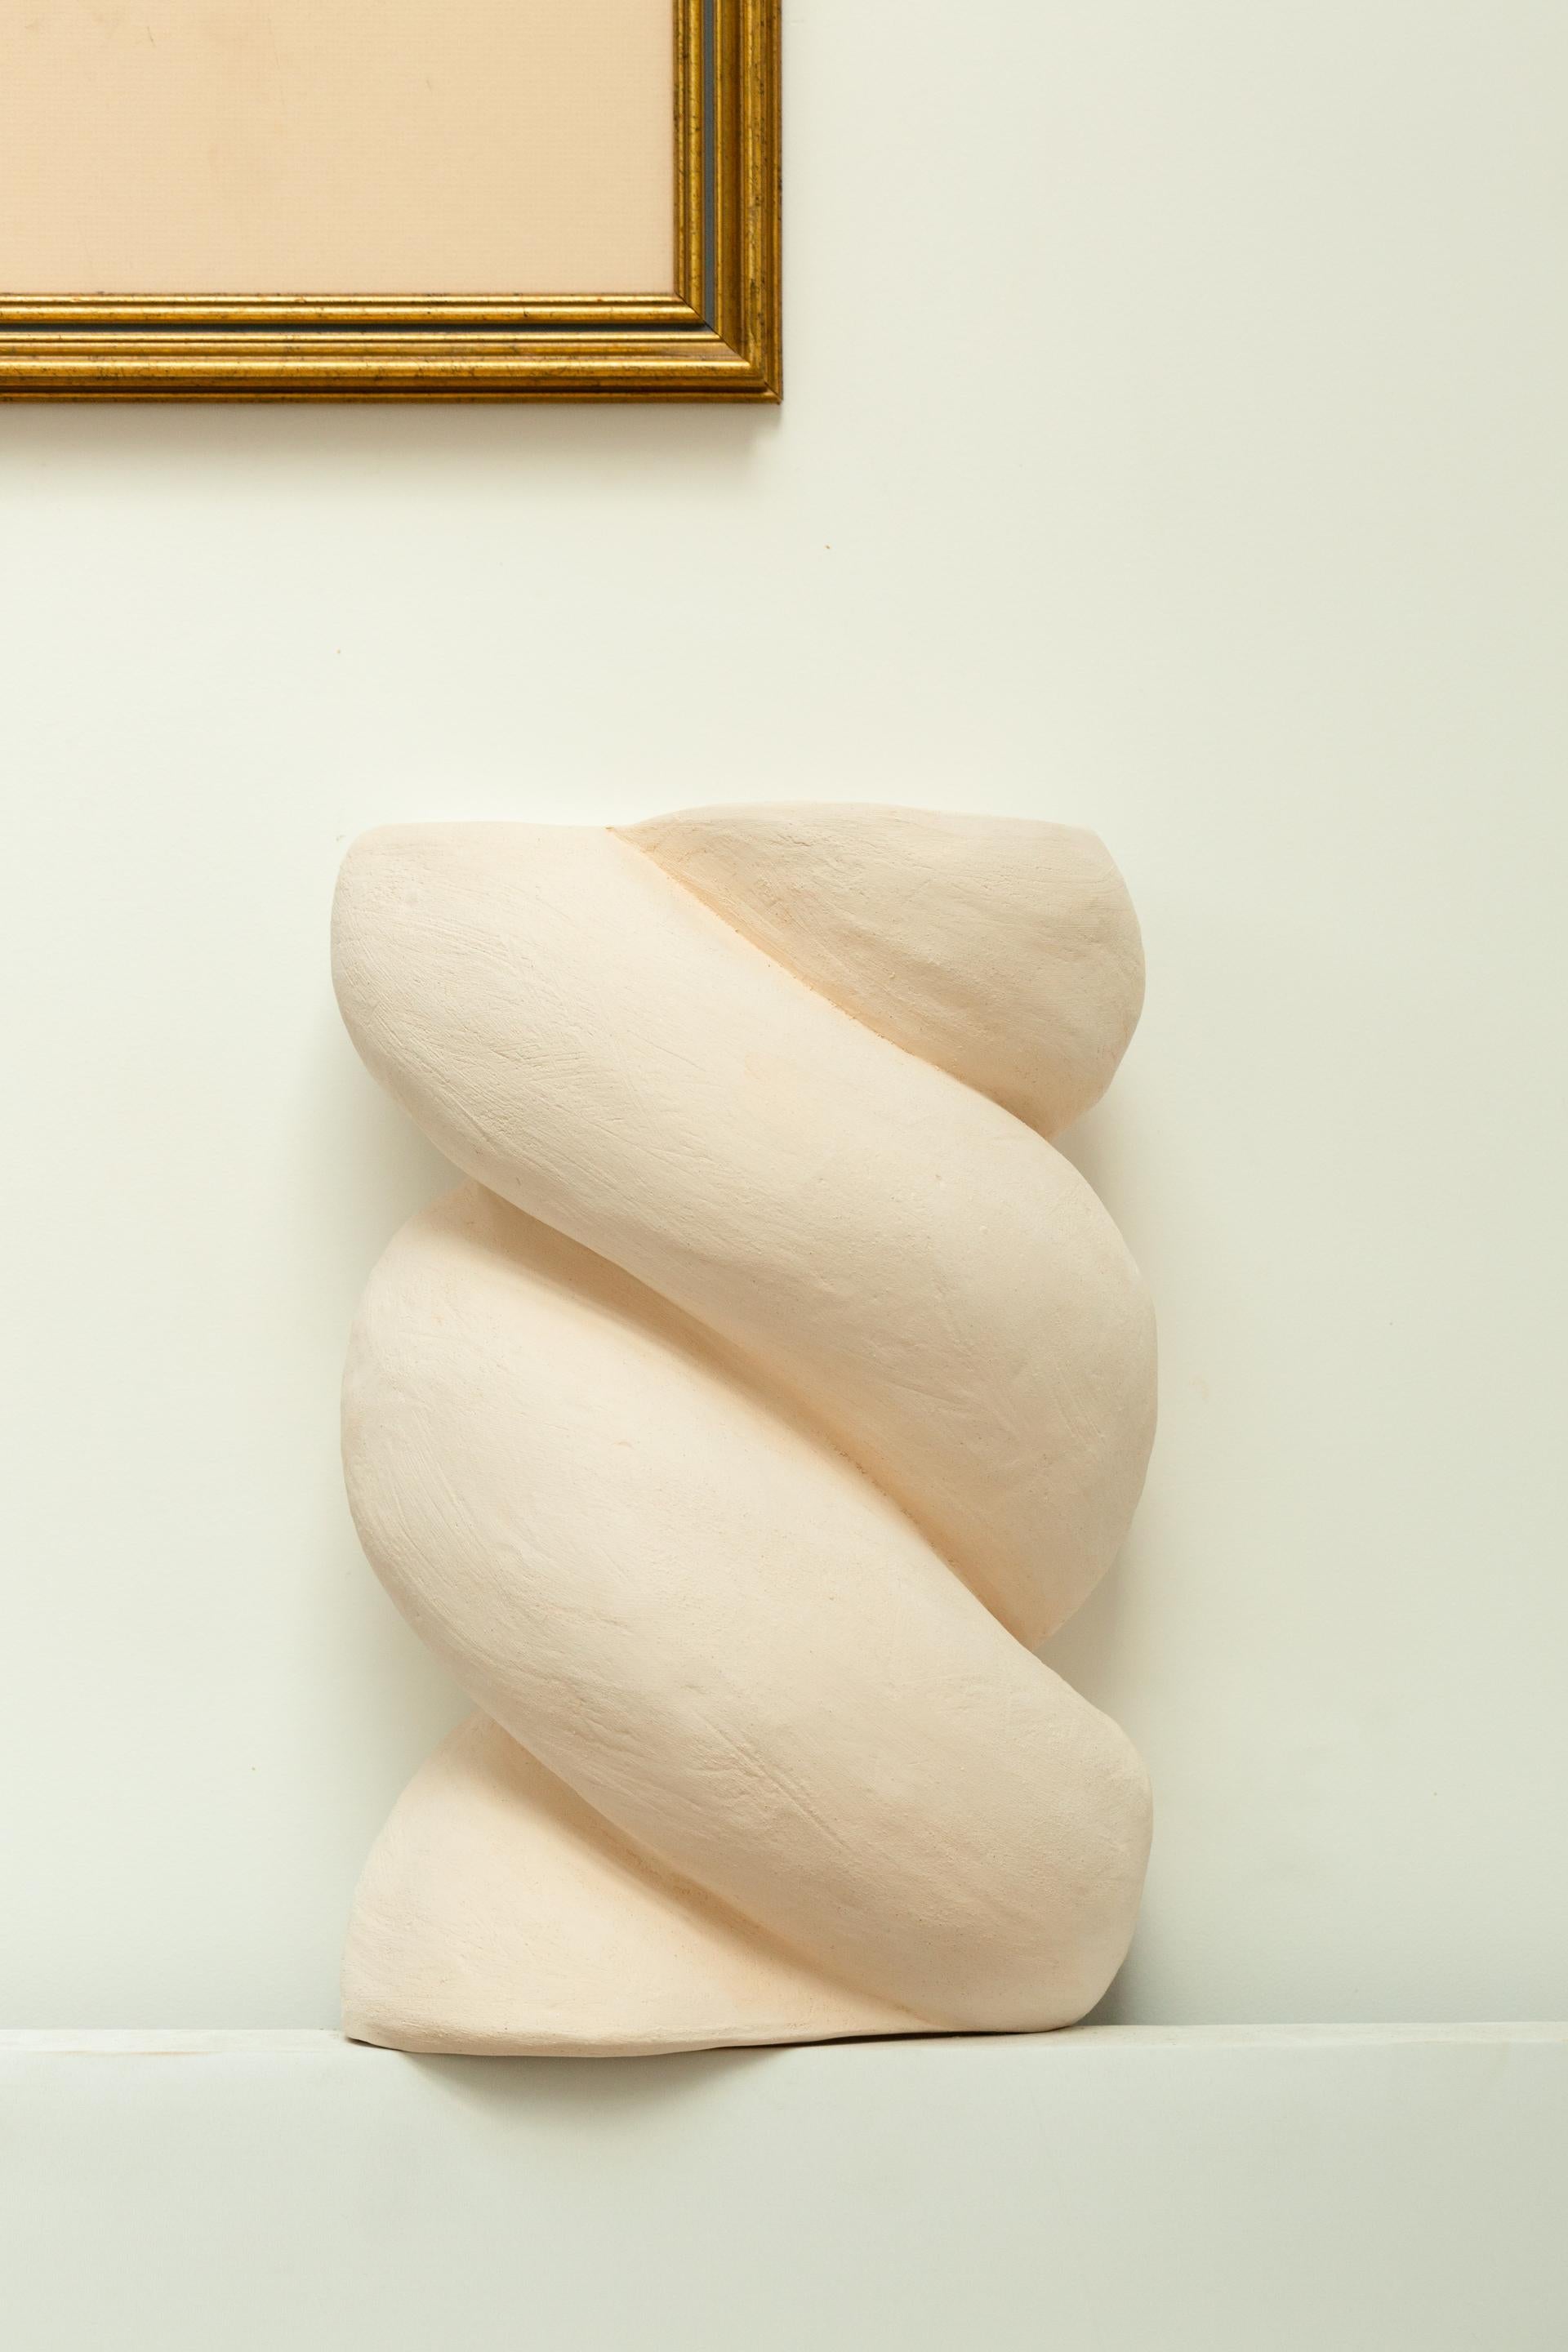 Giant White Babka Sconce by Di Fretto
Dimensions: W 23 x D 18 x H 35 cm
Materials: White Faience (not glazed)
Also Available: Terracotta (not glazed)


Aurélie Fretti, exploration and sculpture

DiFretto was born in 2019 when Aurélie Fretti created